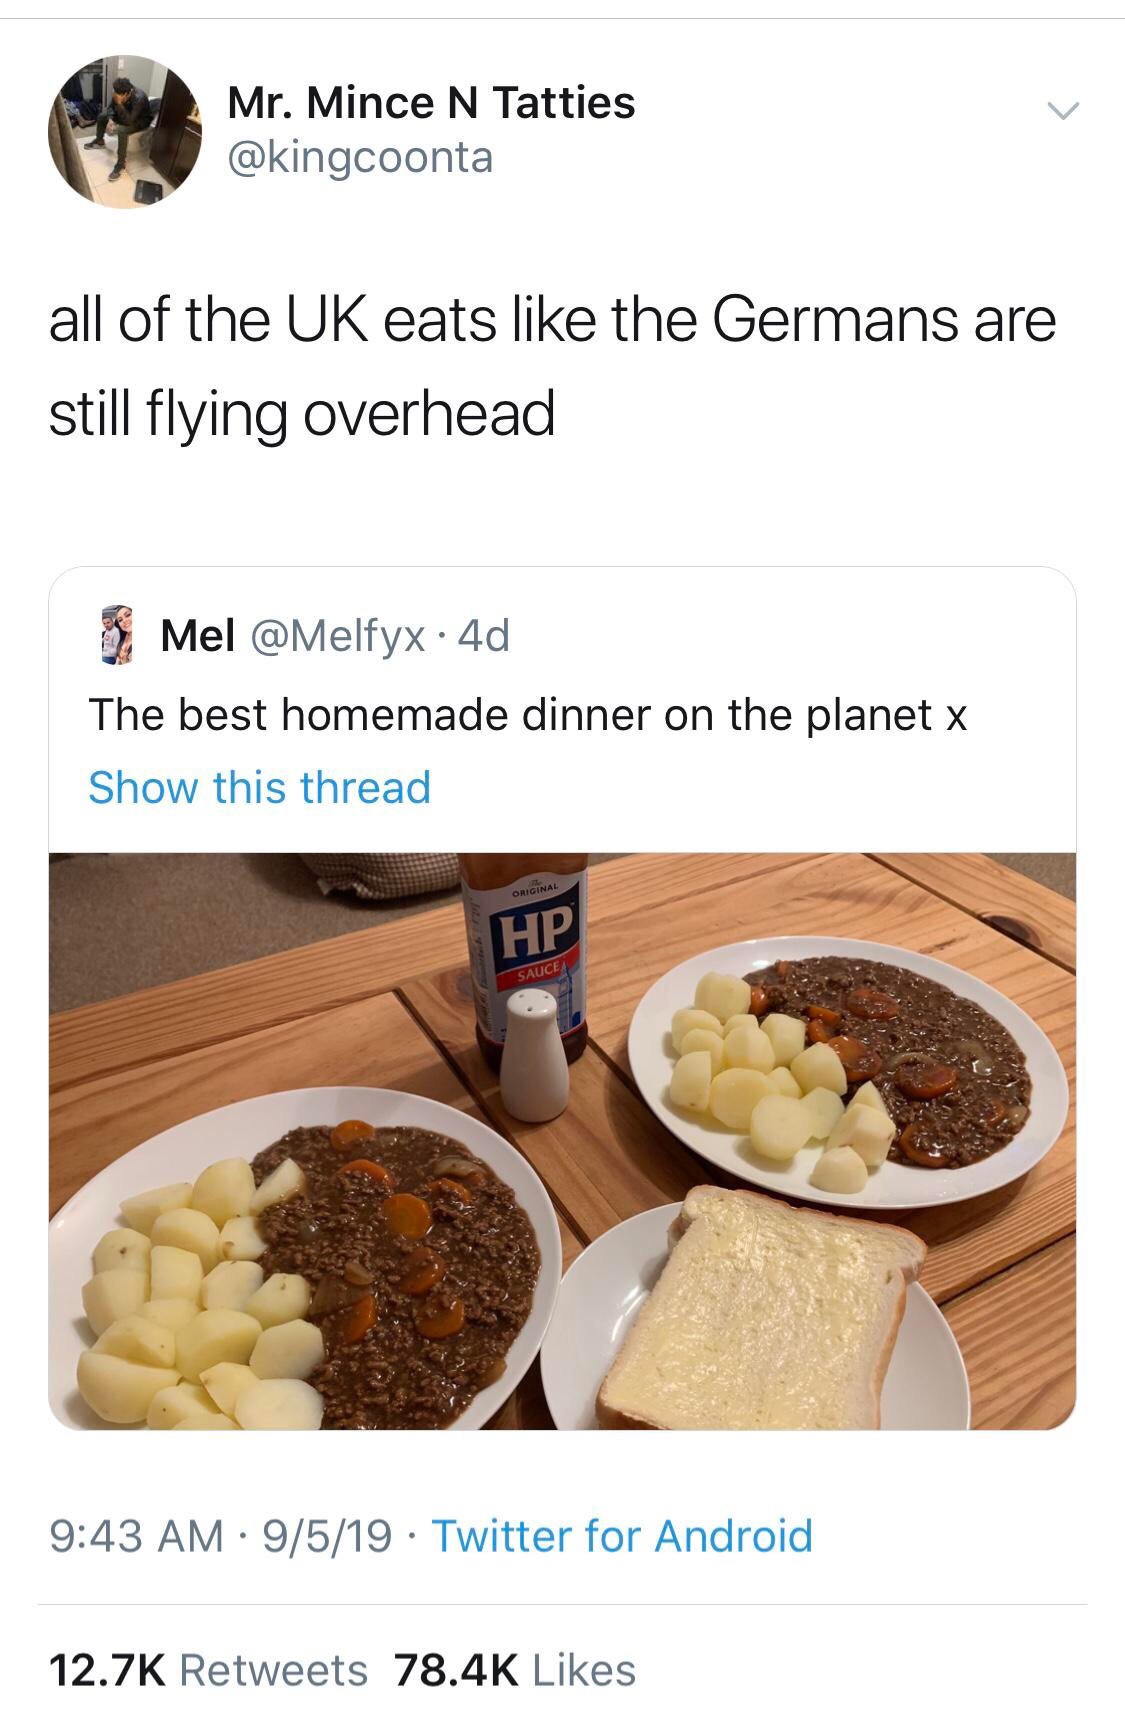 British meme - Dinner - Mr. Mince N Tatties all of the Uk eats the Germans are still flying overhead Mel . 4d The best homemade dinner on the planet x Show this thread Original Hp Sauce 9519 Twitter for Android